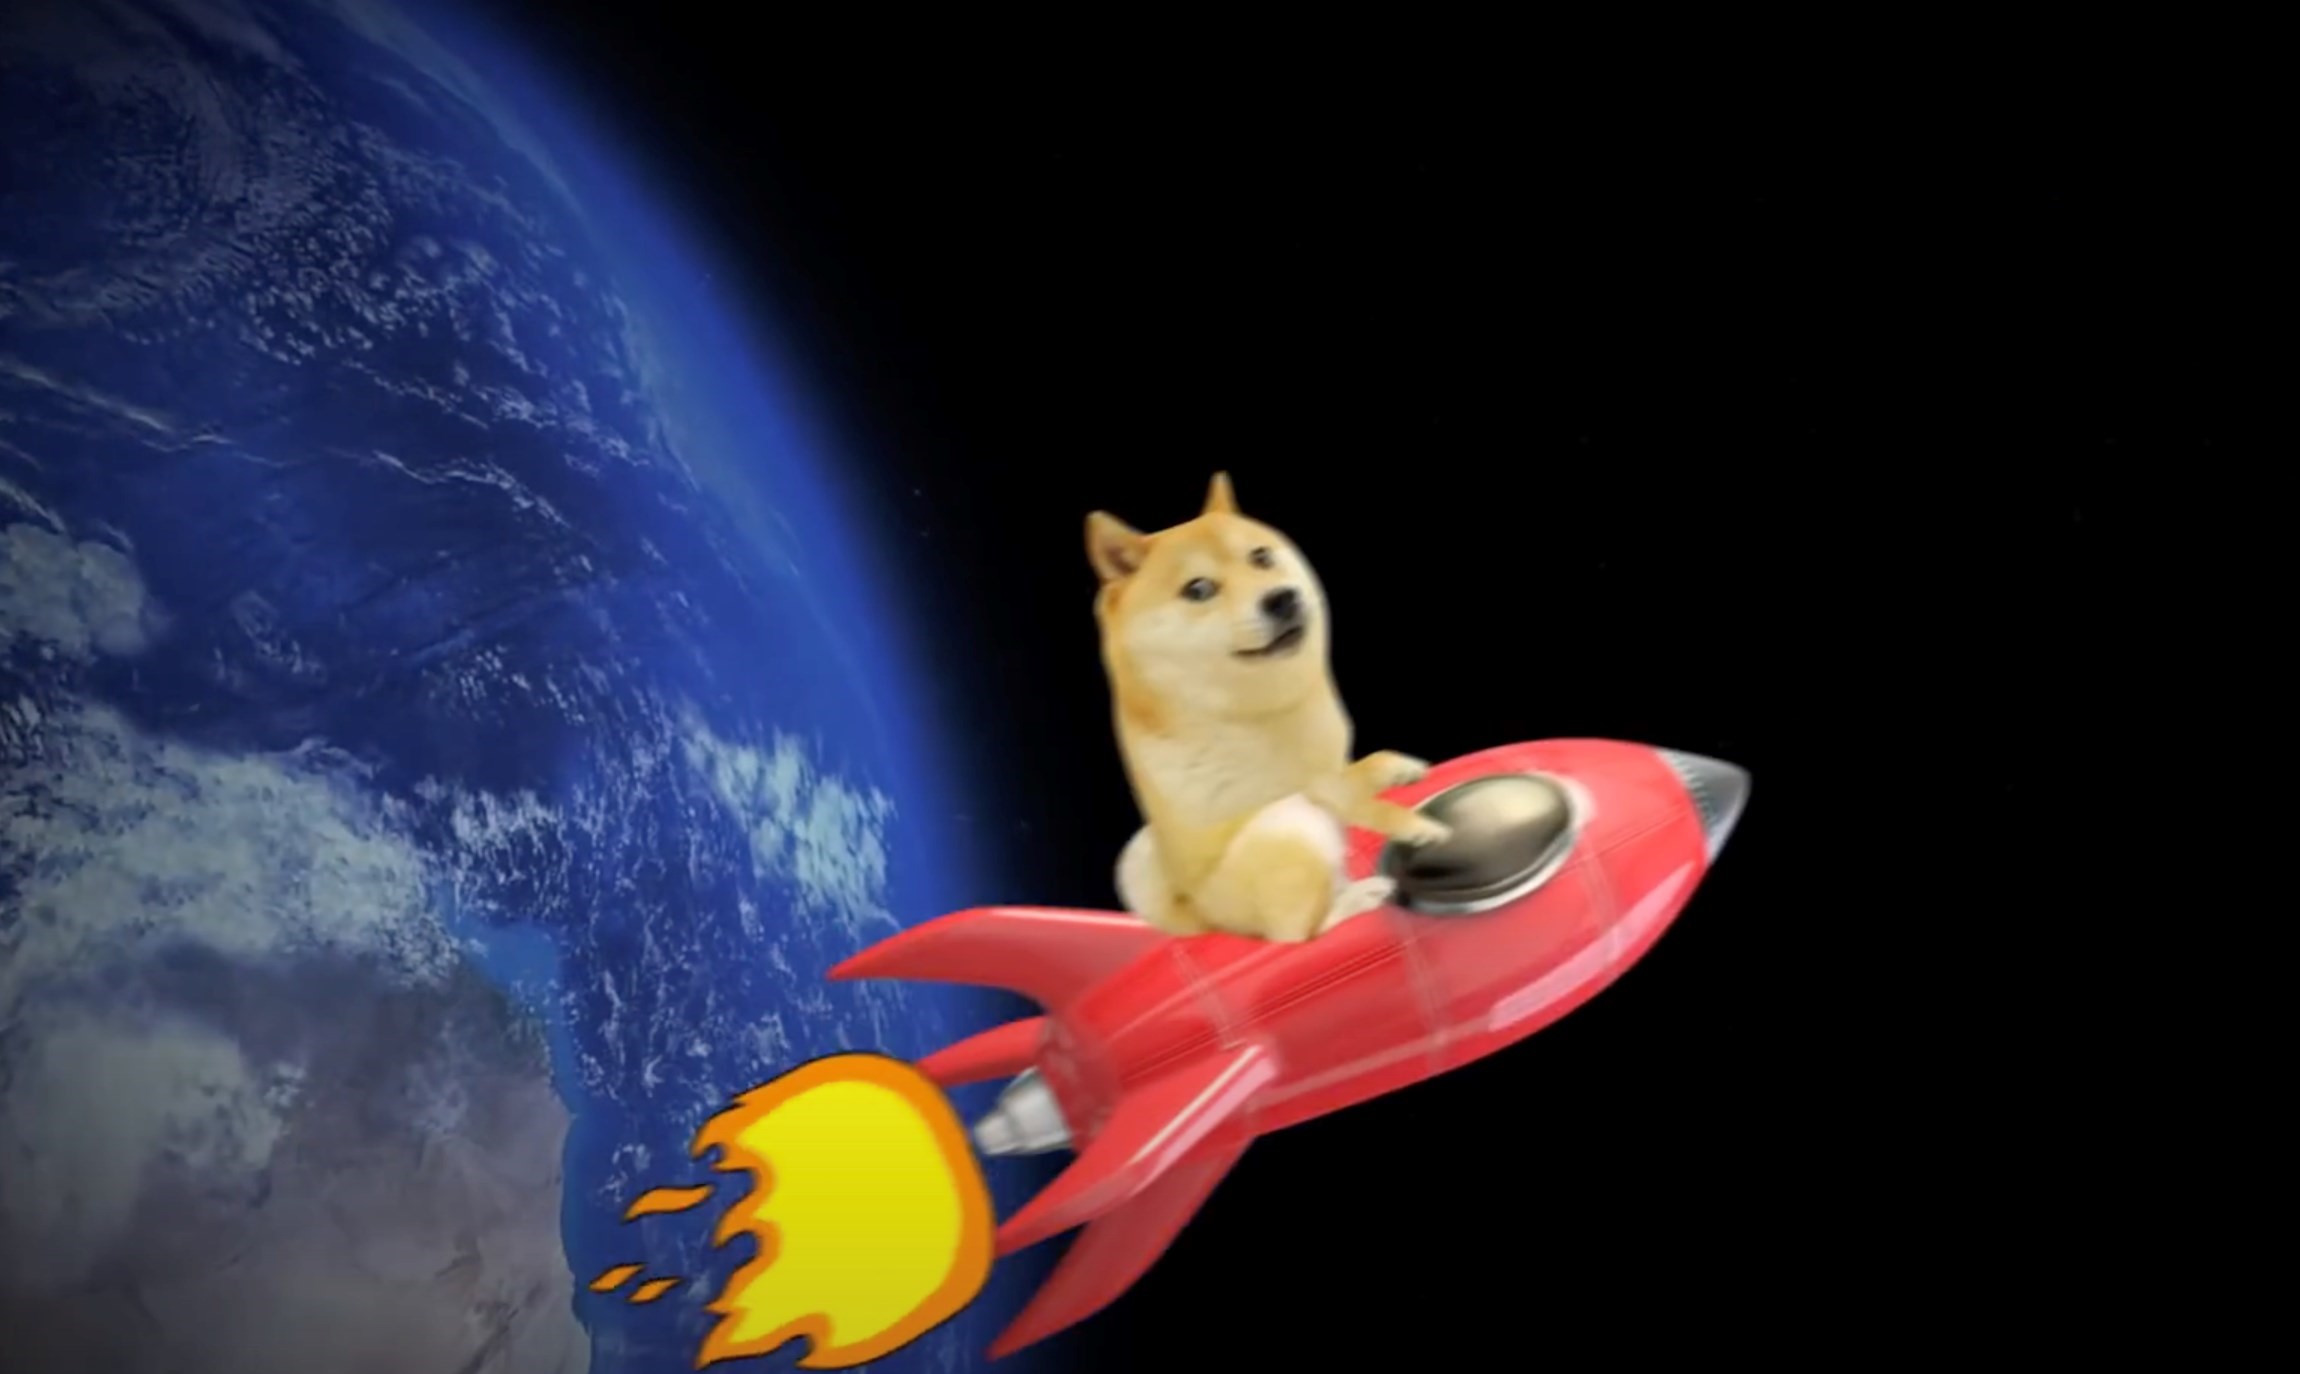 🚀🚀🚀 Game - Dogecoin to the Moon 🚀🚀🚀 #dogemoongame #dogecoin